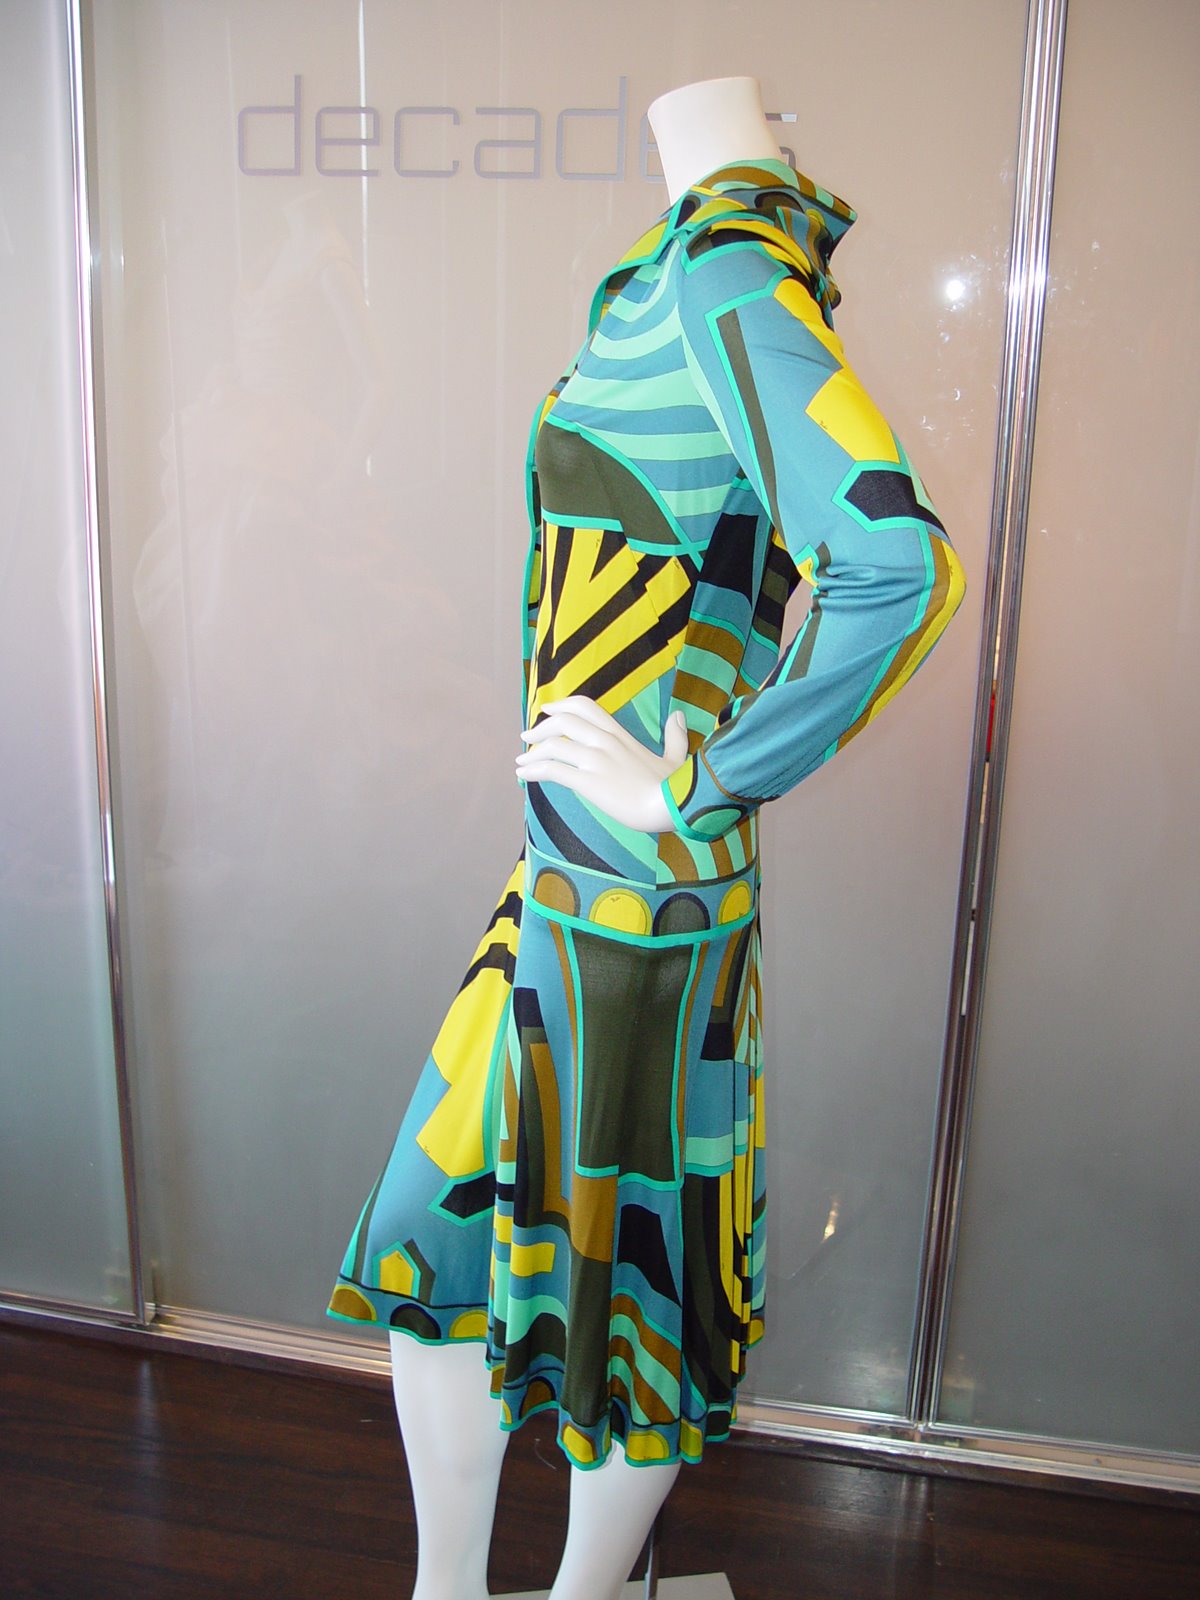 [EMILIO+PUCCI+FOR+LORD+AND+TAYLOR+BLUE+AND+ACID+YELLOW+SILK+JERSEY+SHIRTMAKER+DRESS+WITH+DROP+WAIST+MARKED+SIZE+14+C+1960.JPG+(2).JPG]